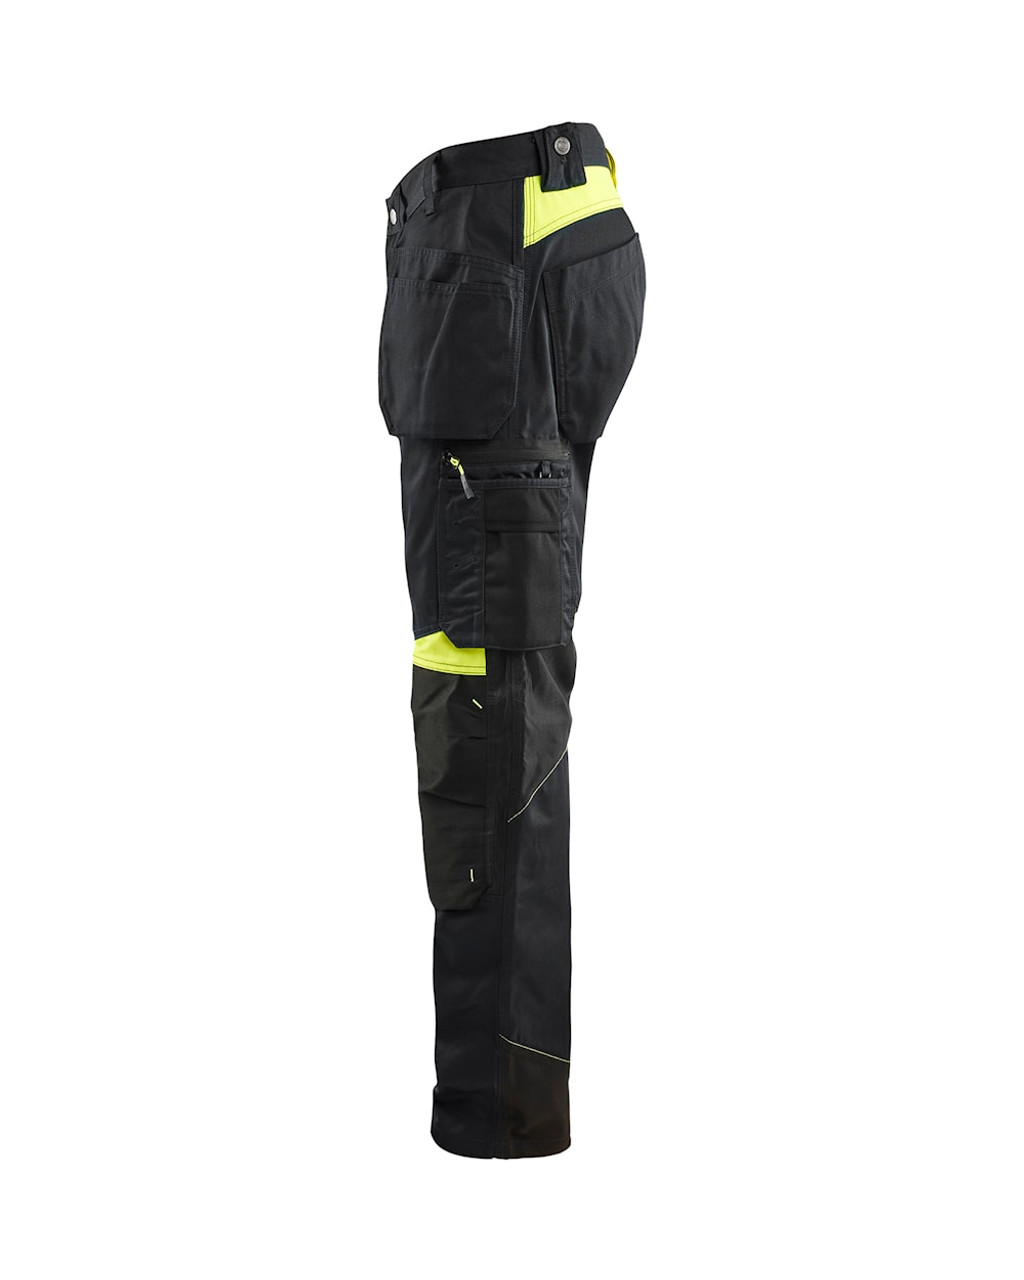 Buy Online Mens Black Trousers with Holster Pockets for the Electrical Industry and Electricians in Melbourne, Sydney and Perth